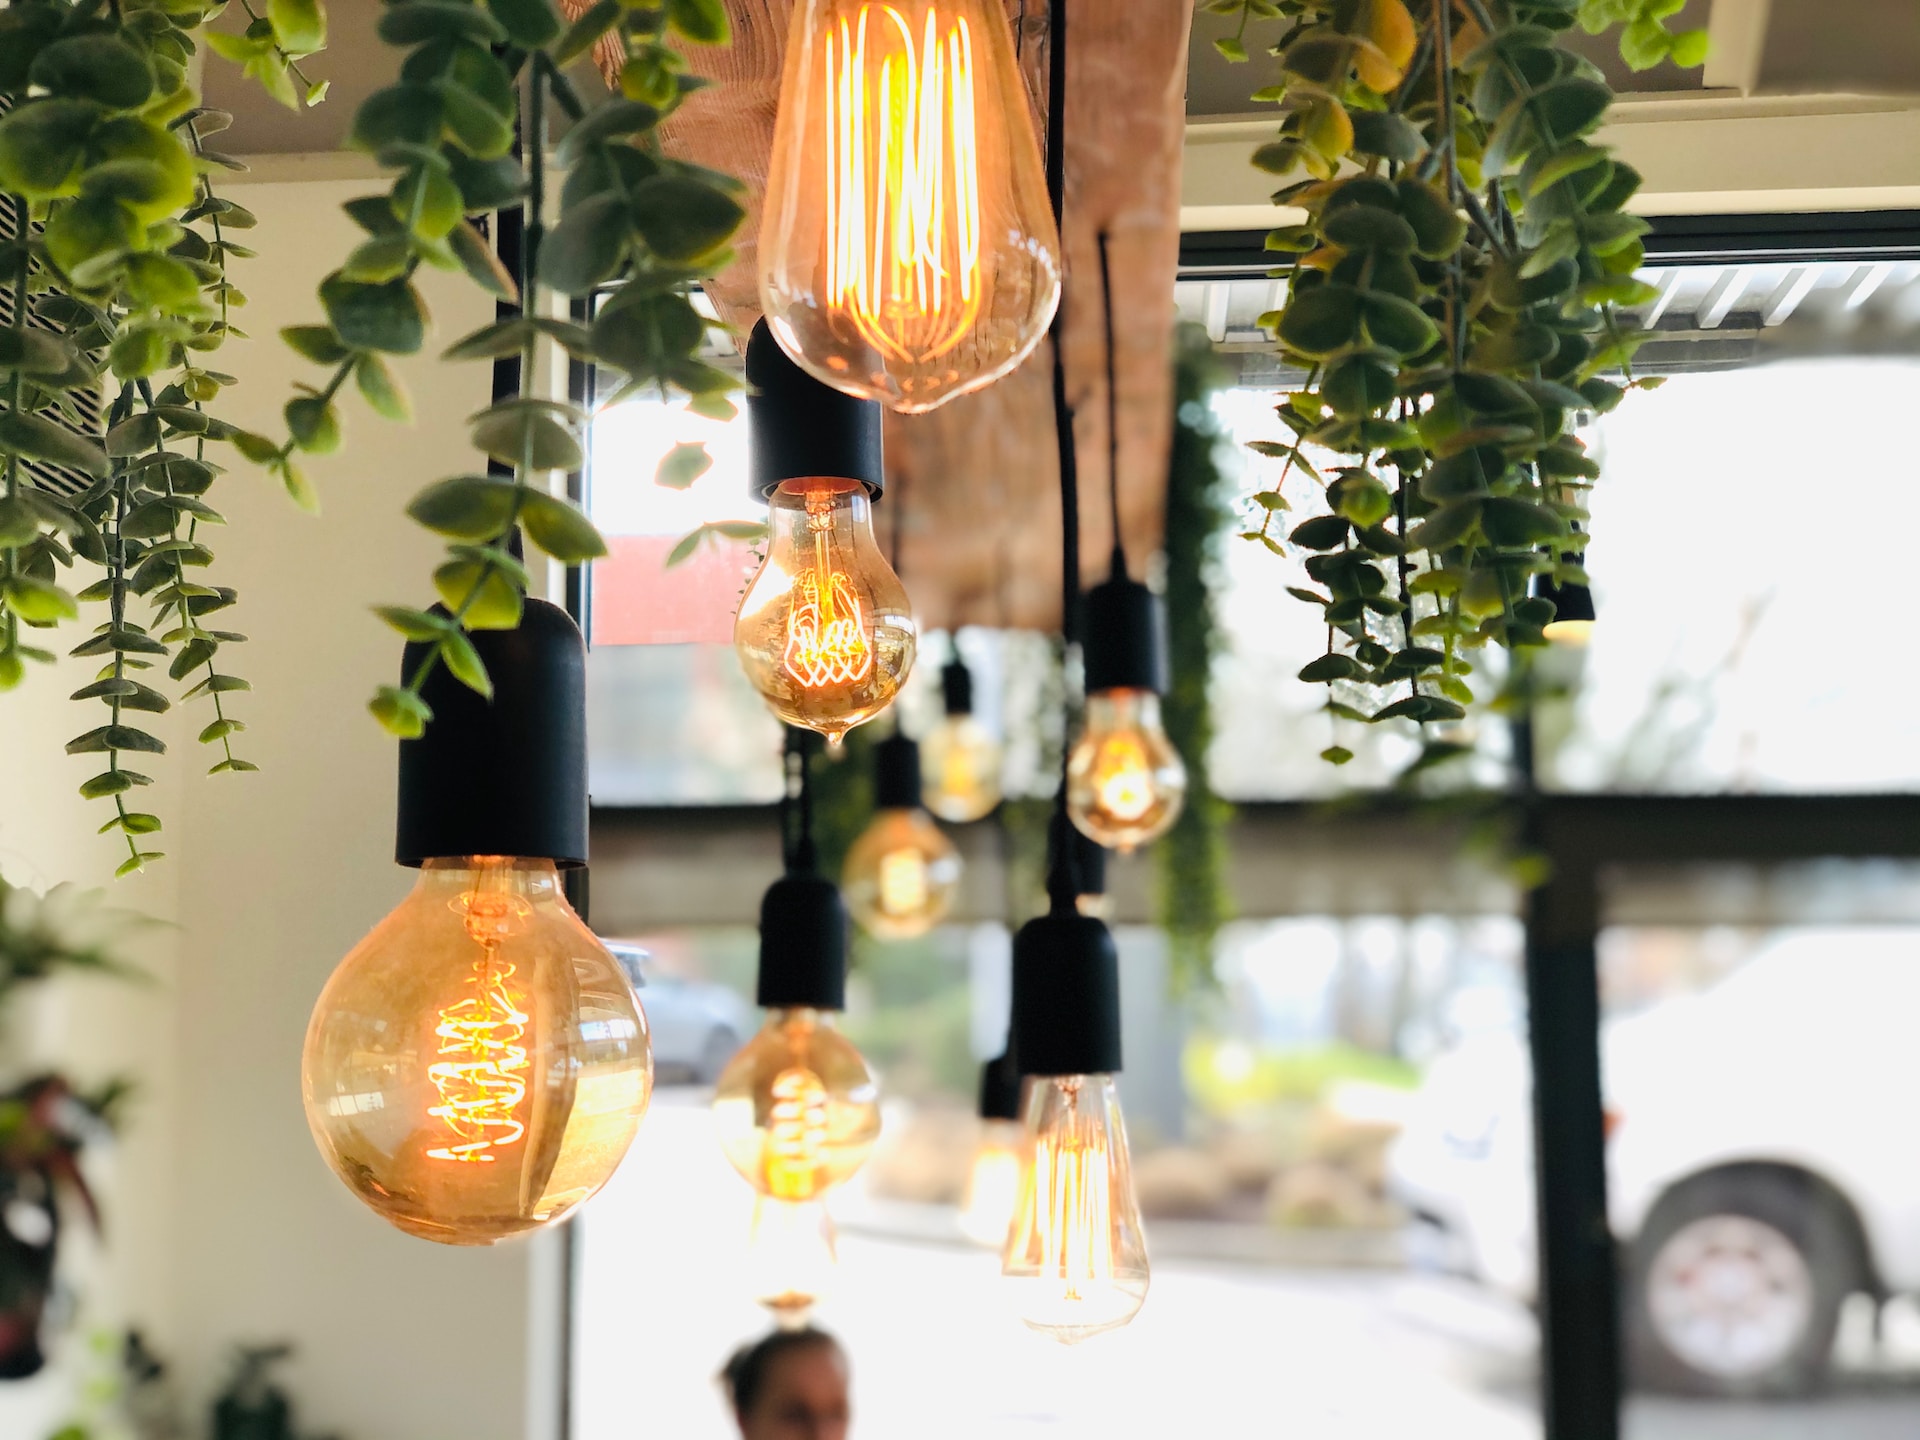 Light bulbs and plants hanging from the ceiling.